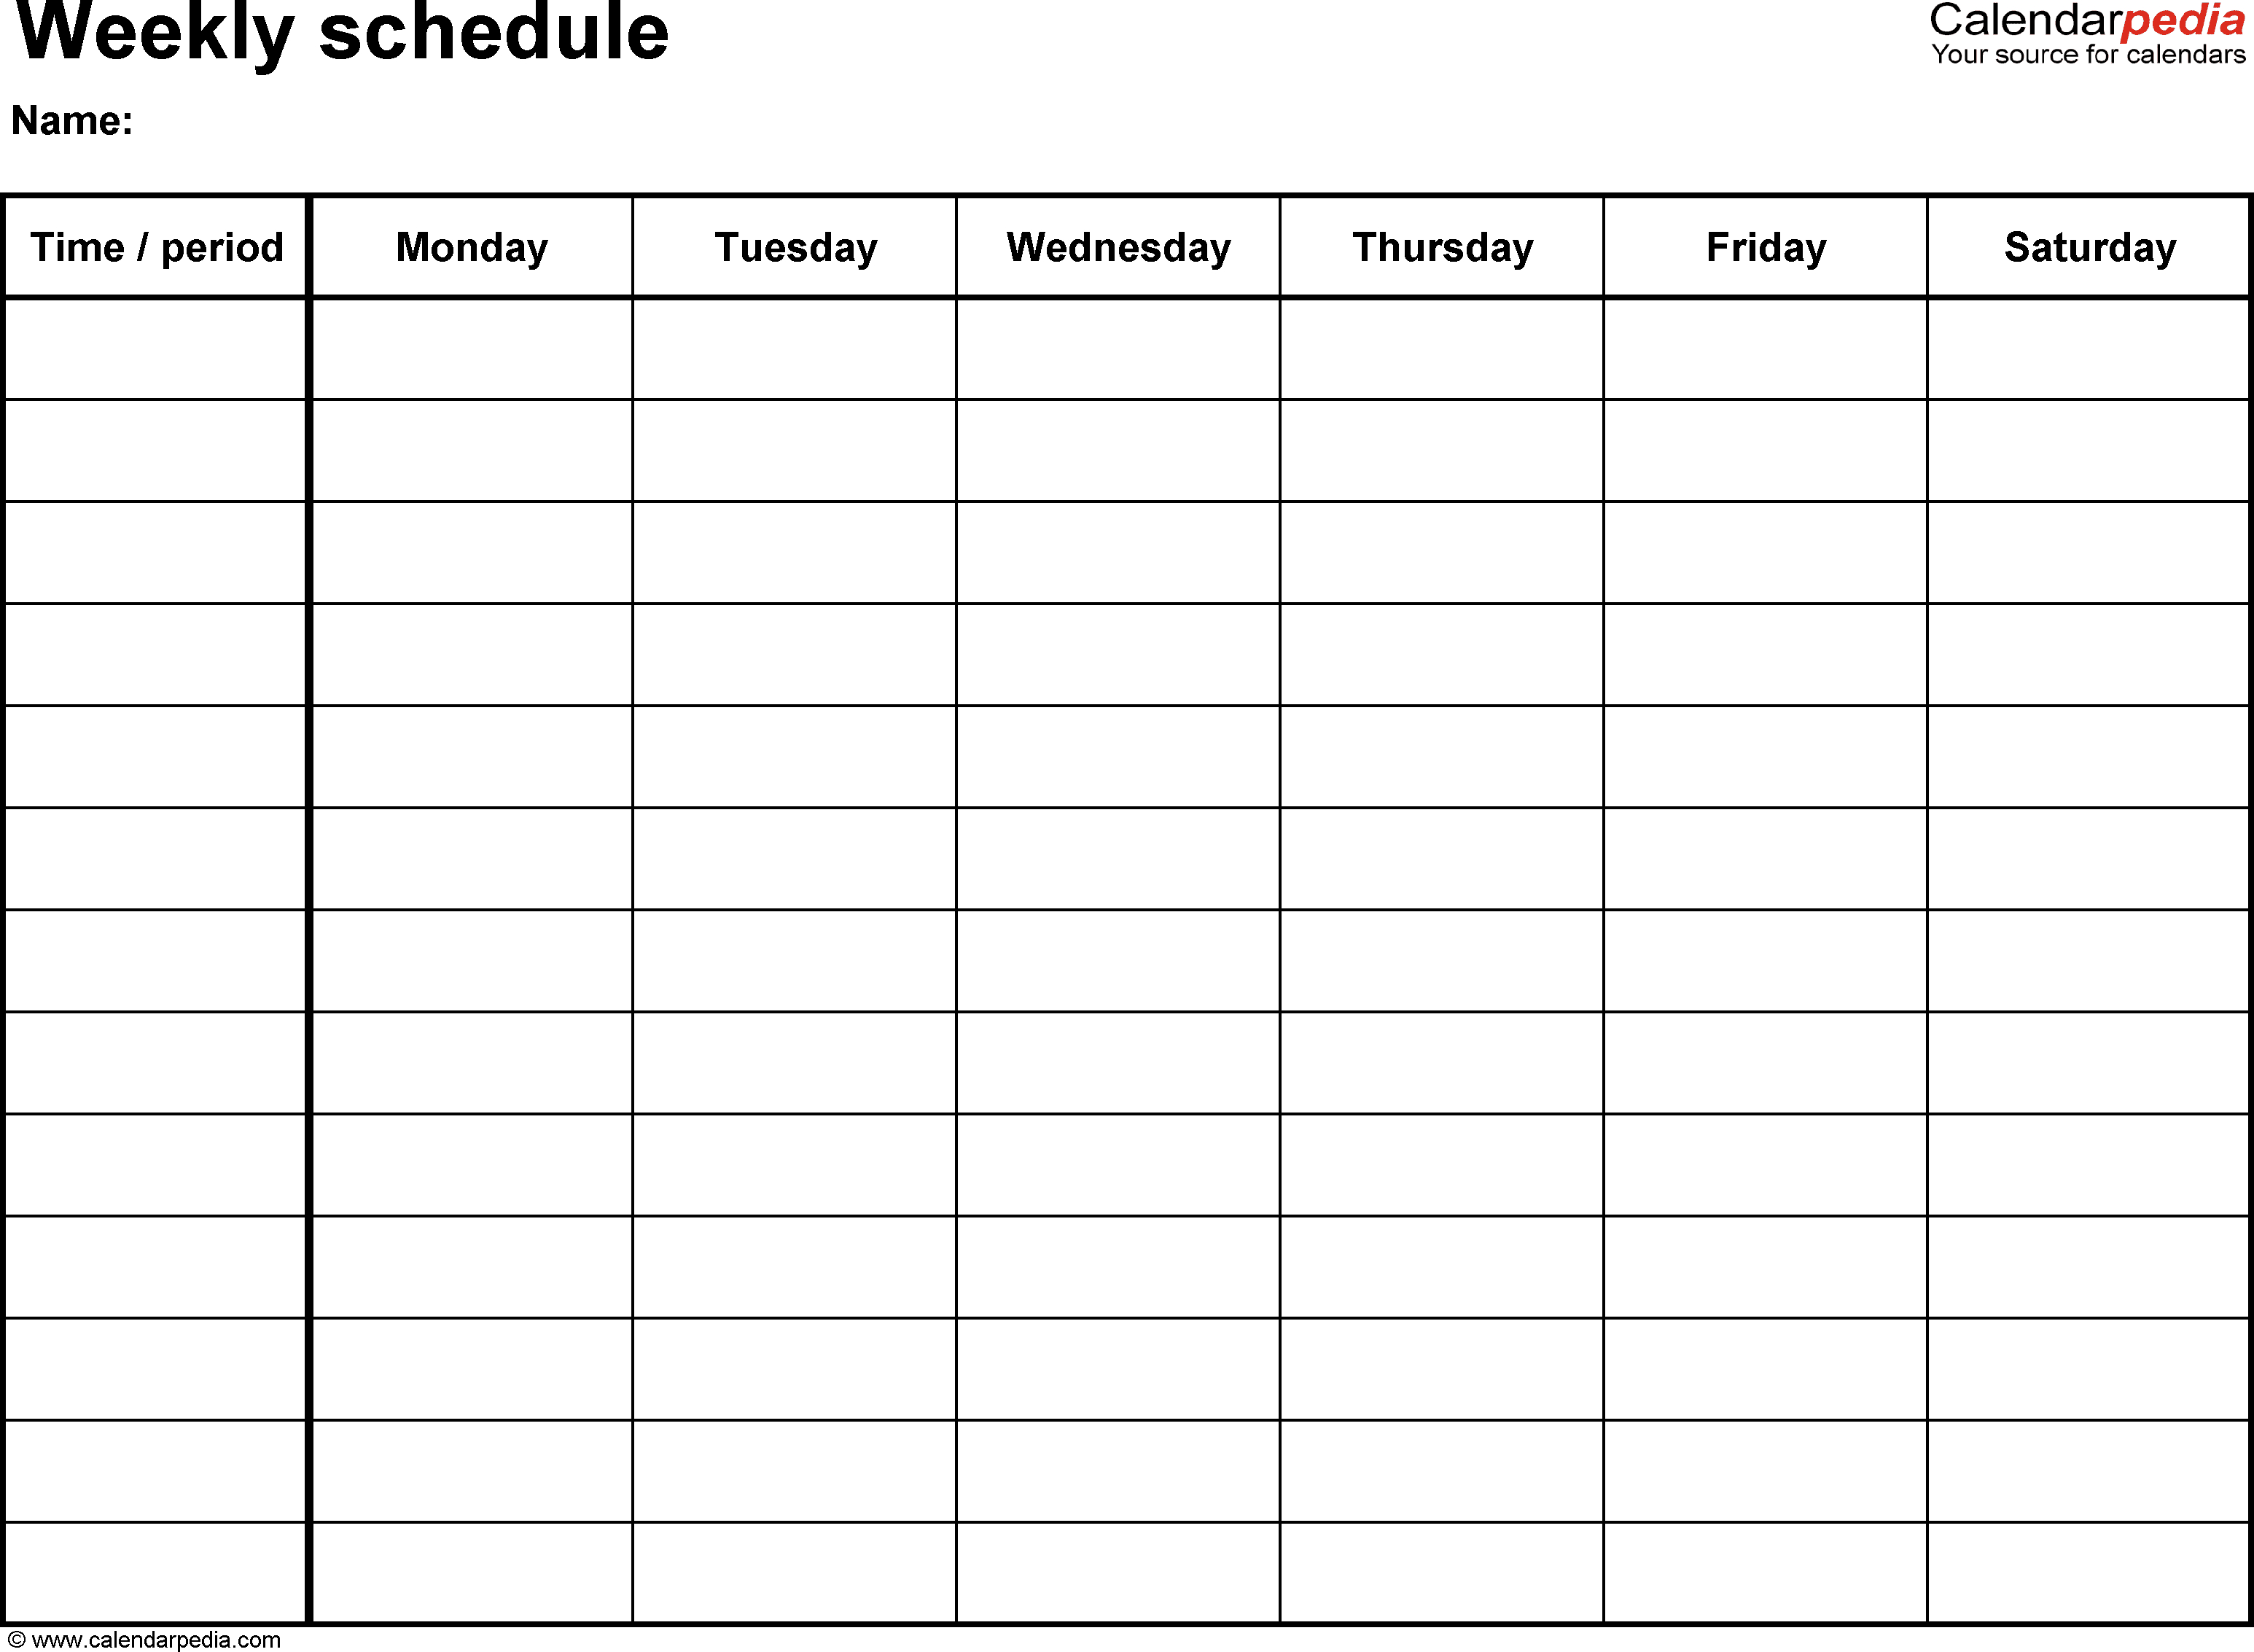 Free Weekly Schedule Templates For Pdf - 18 Templates - Free Printable Weekly Schedule